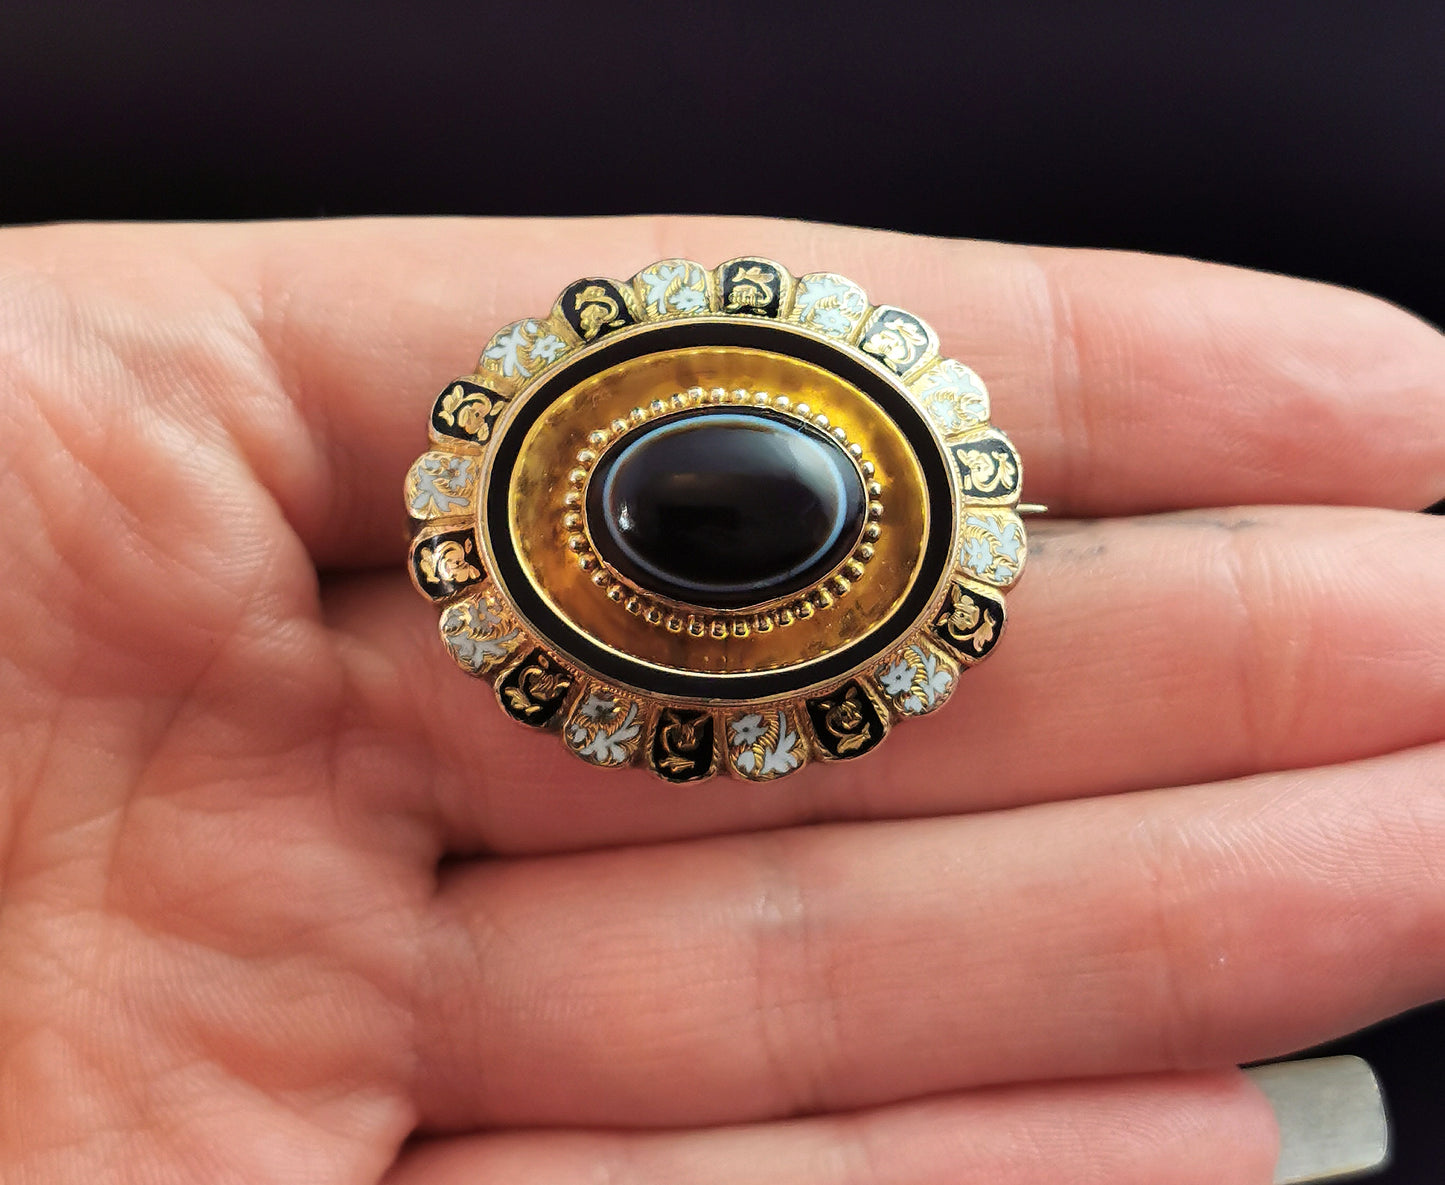 Antique Banded agate mourning brooch, 9ct gold, hairwork, Black and White enamel, Victorian